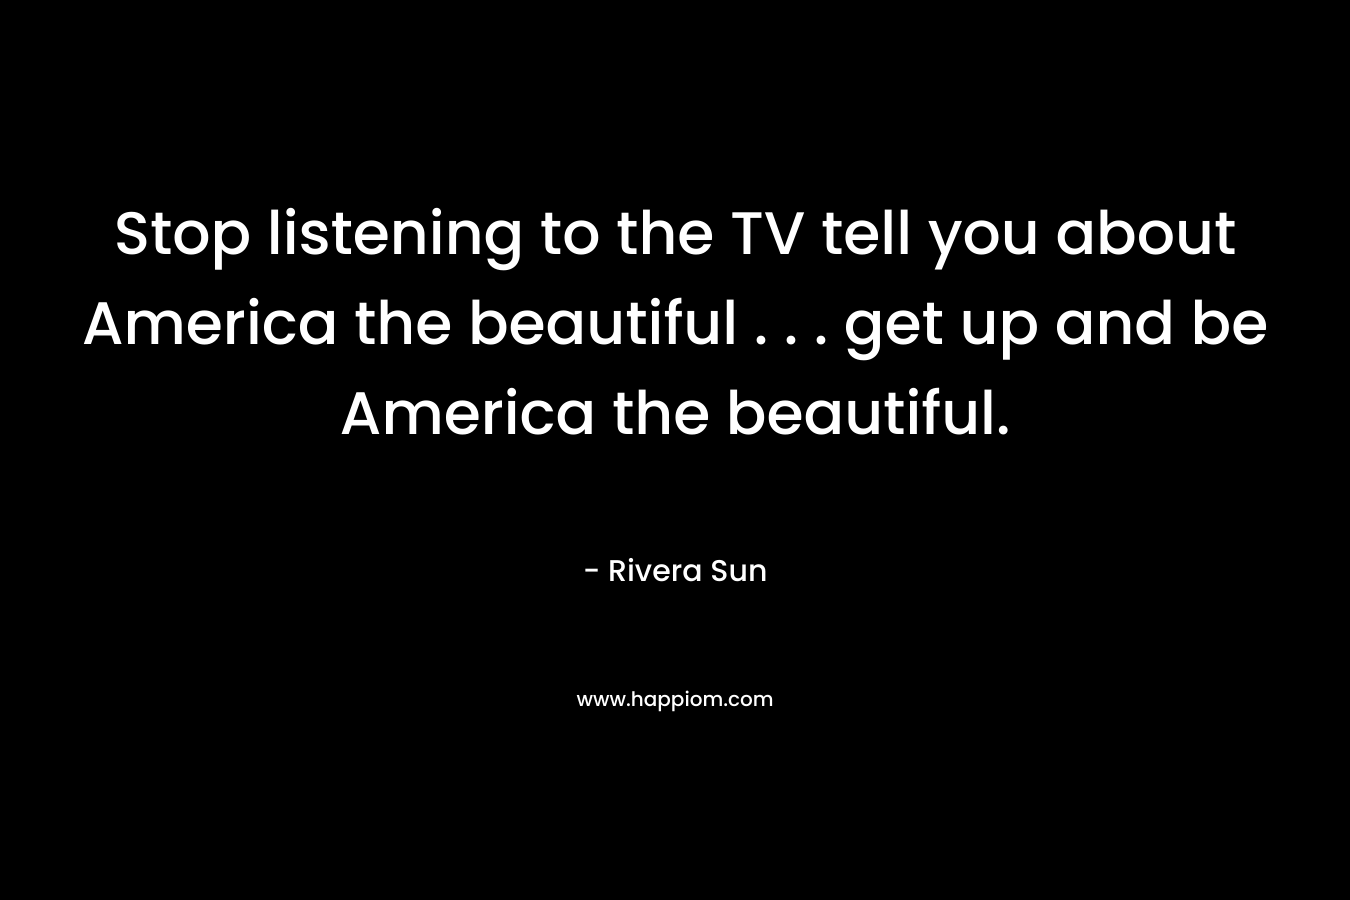 Stop listening to the TV tell you about America the beautiful . . . get up and be America the beautiful. – Rivera Sun